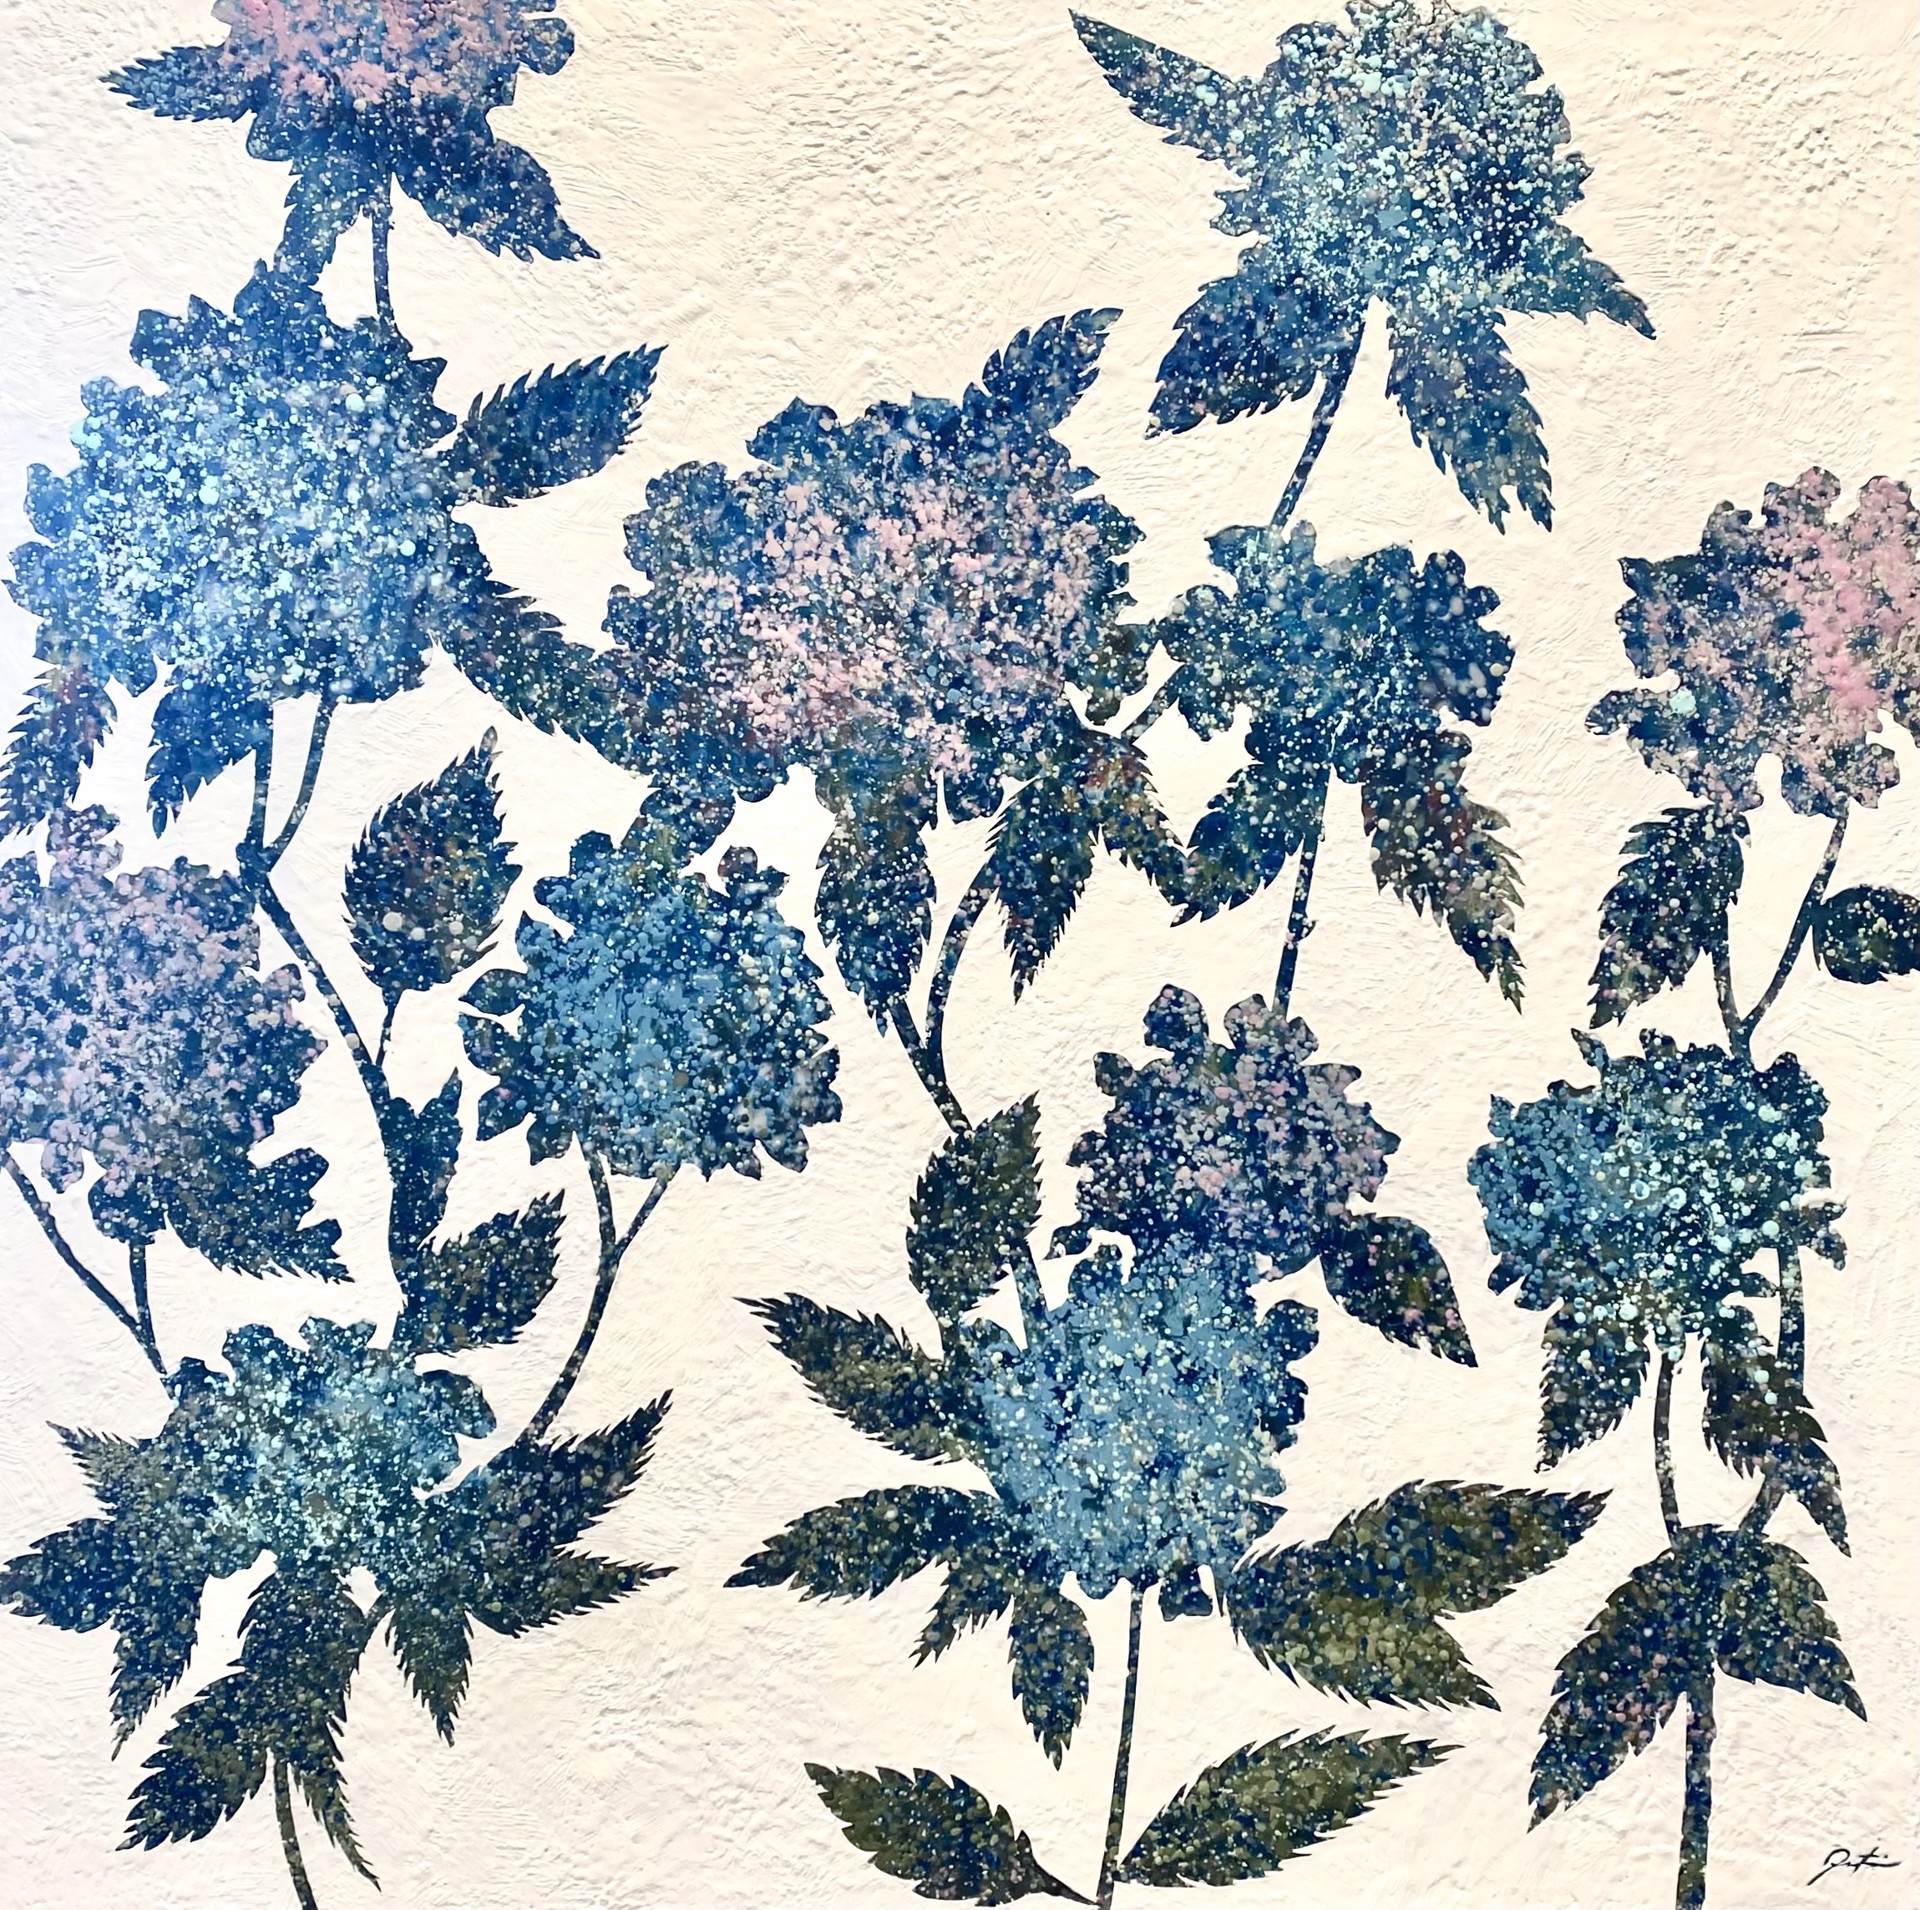 Hydrangea High by Justin Selway